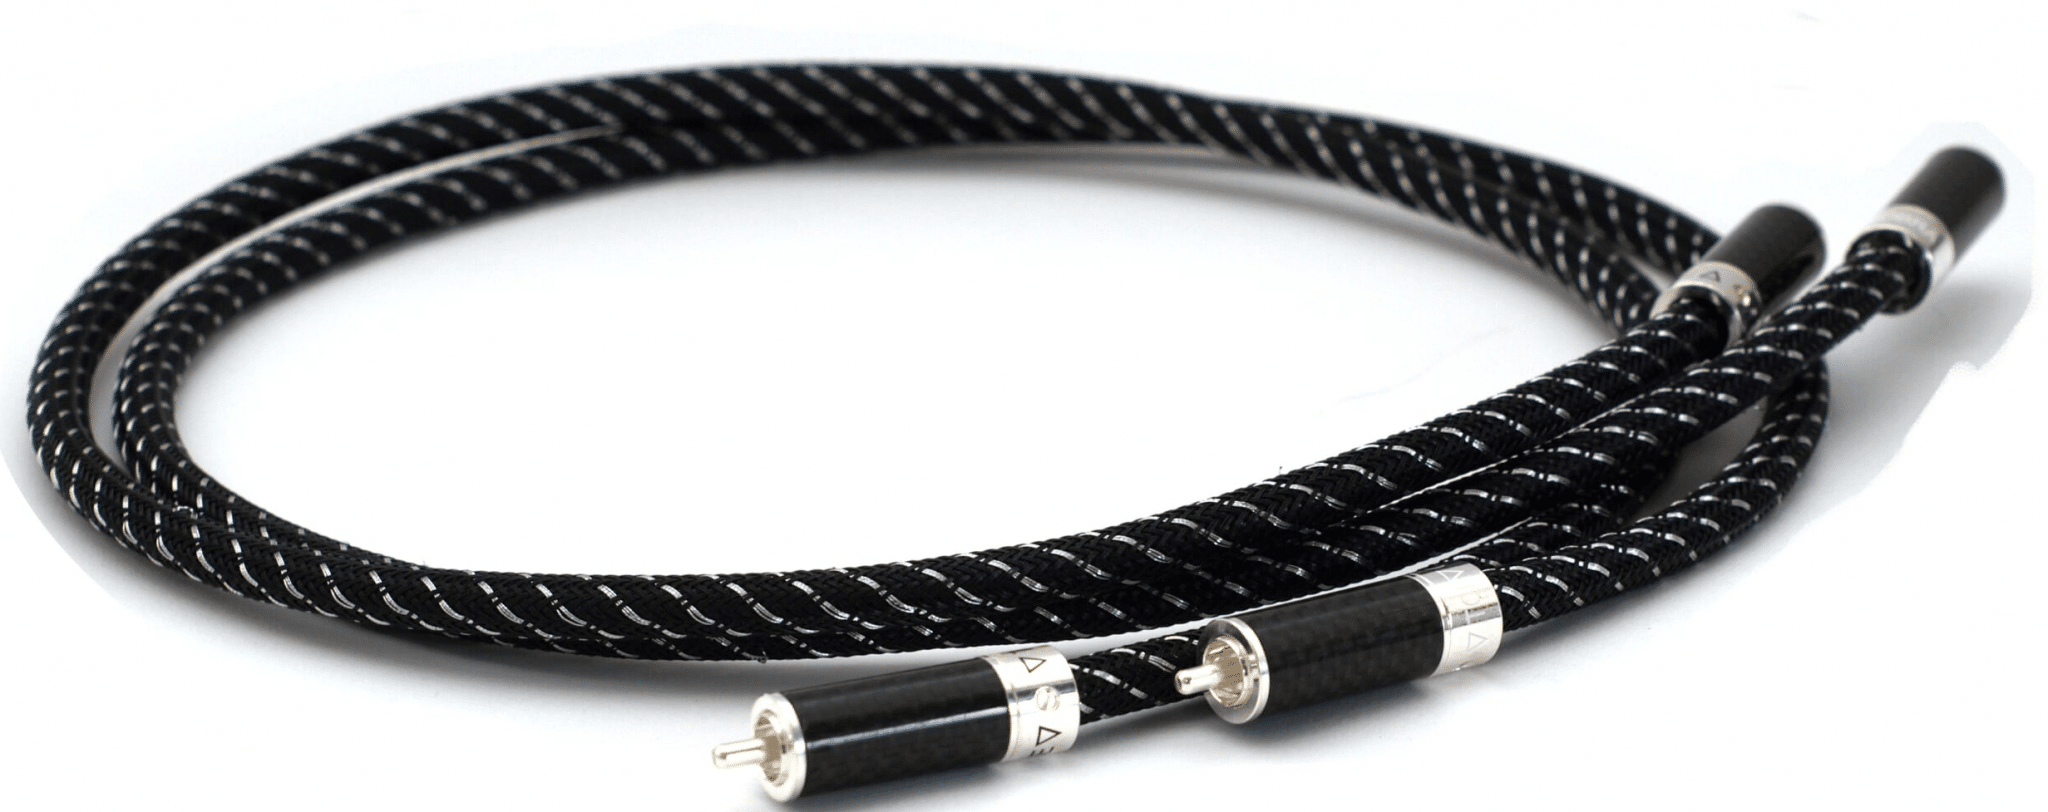 TCI CABLES: THE BIG CATCH UP